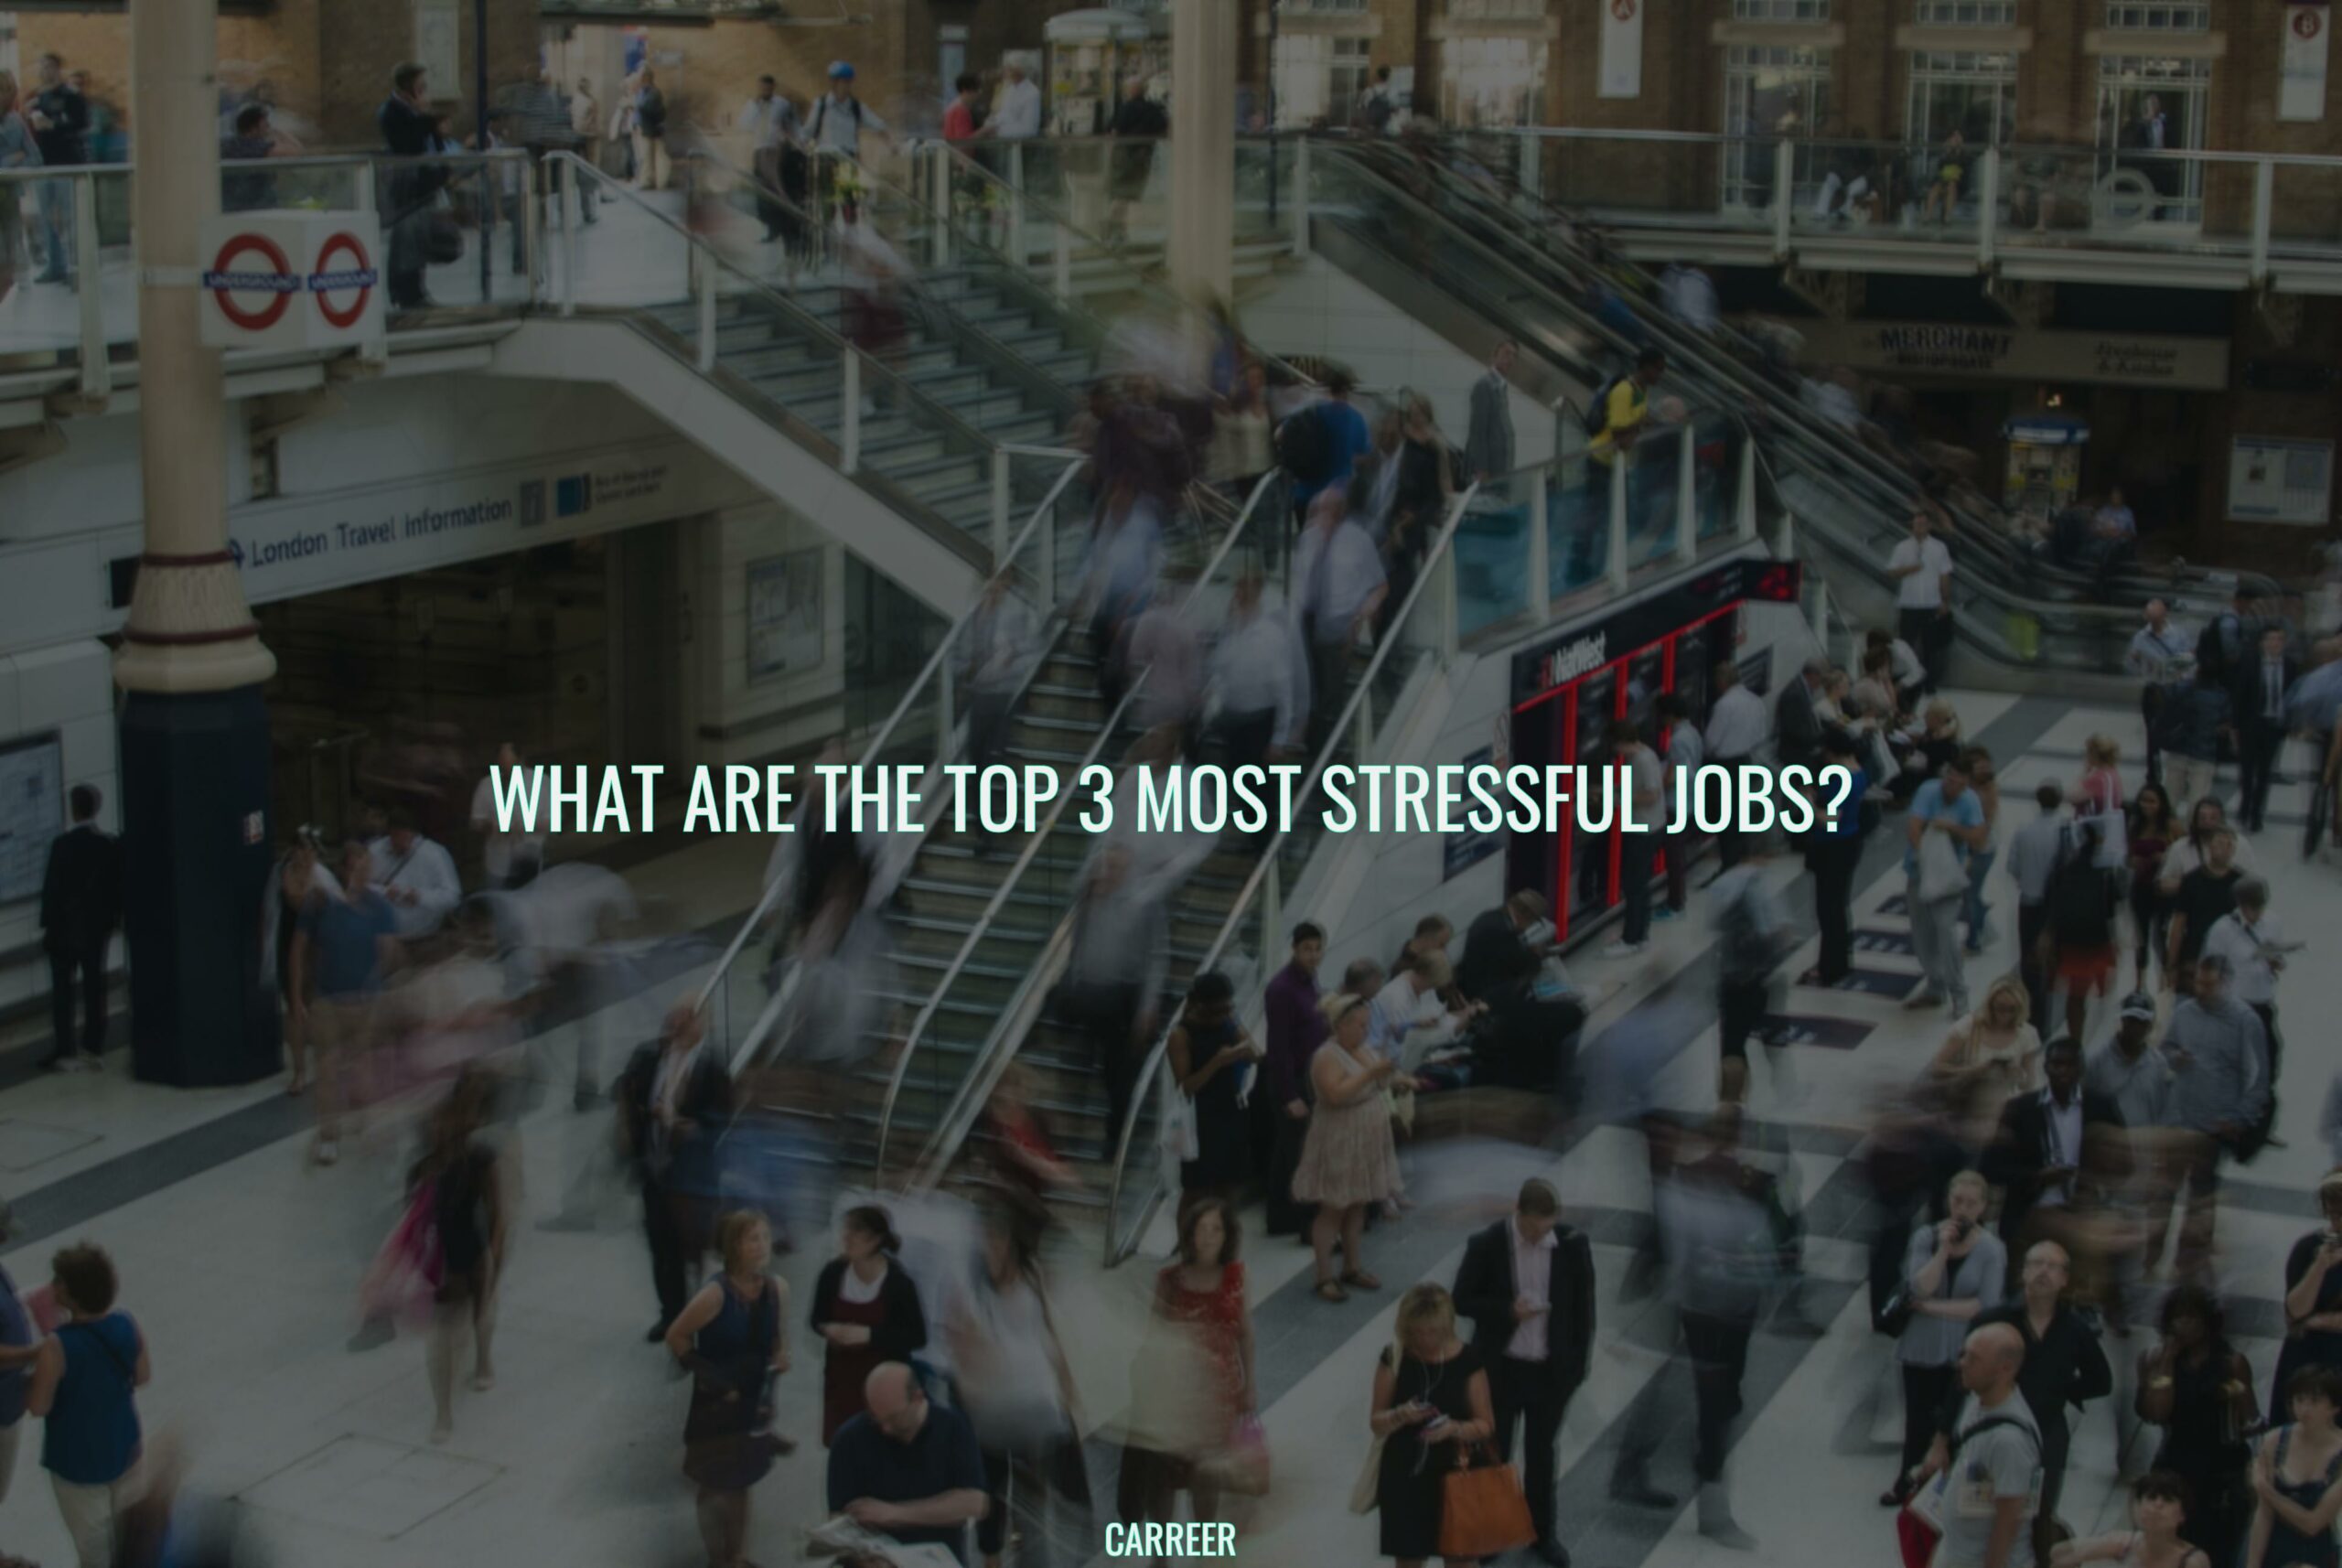 What are the top 3 most stressful jobs?